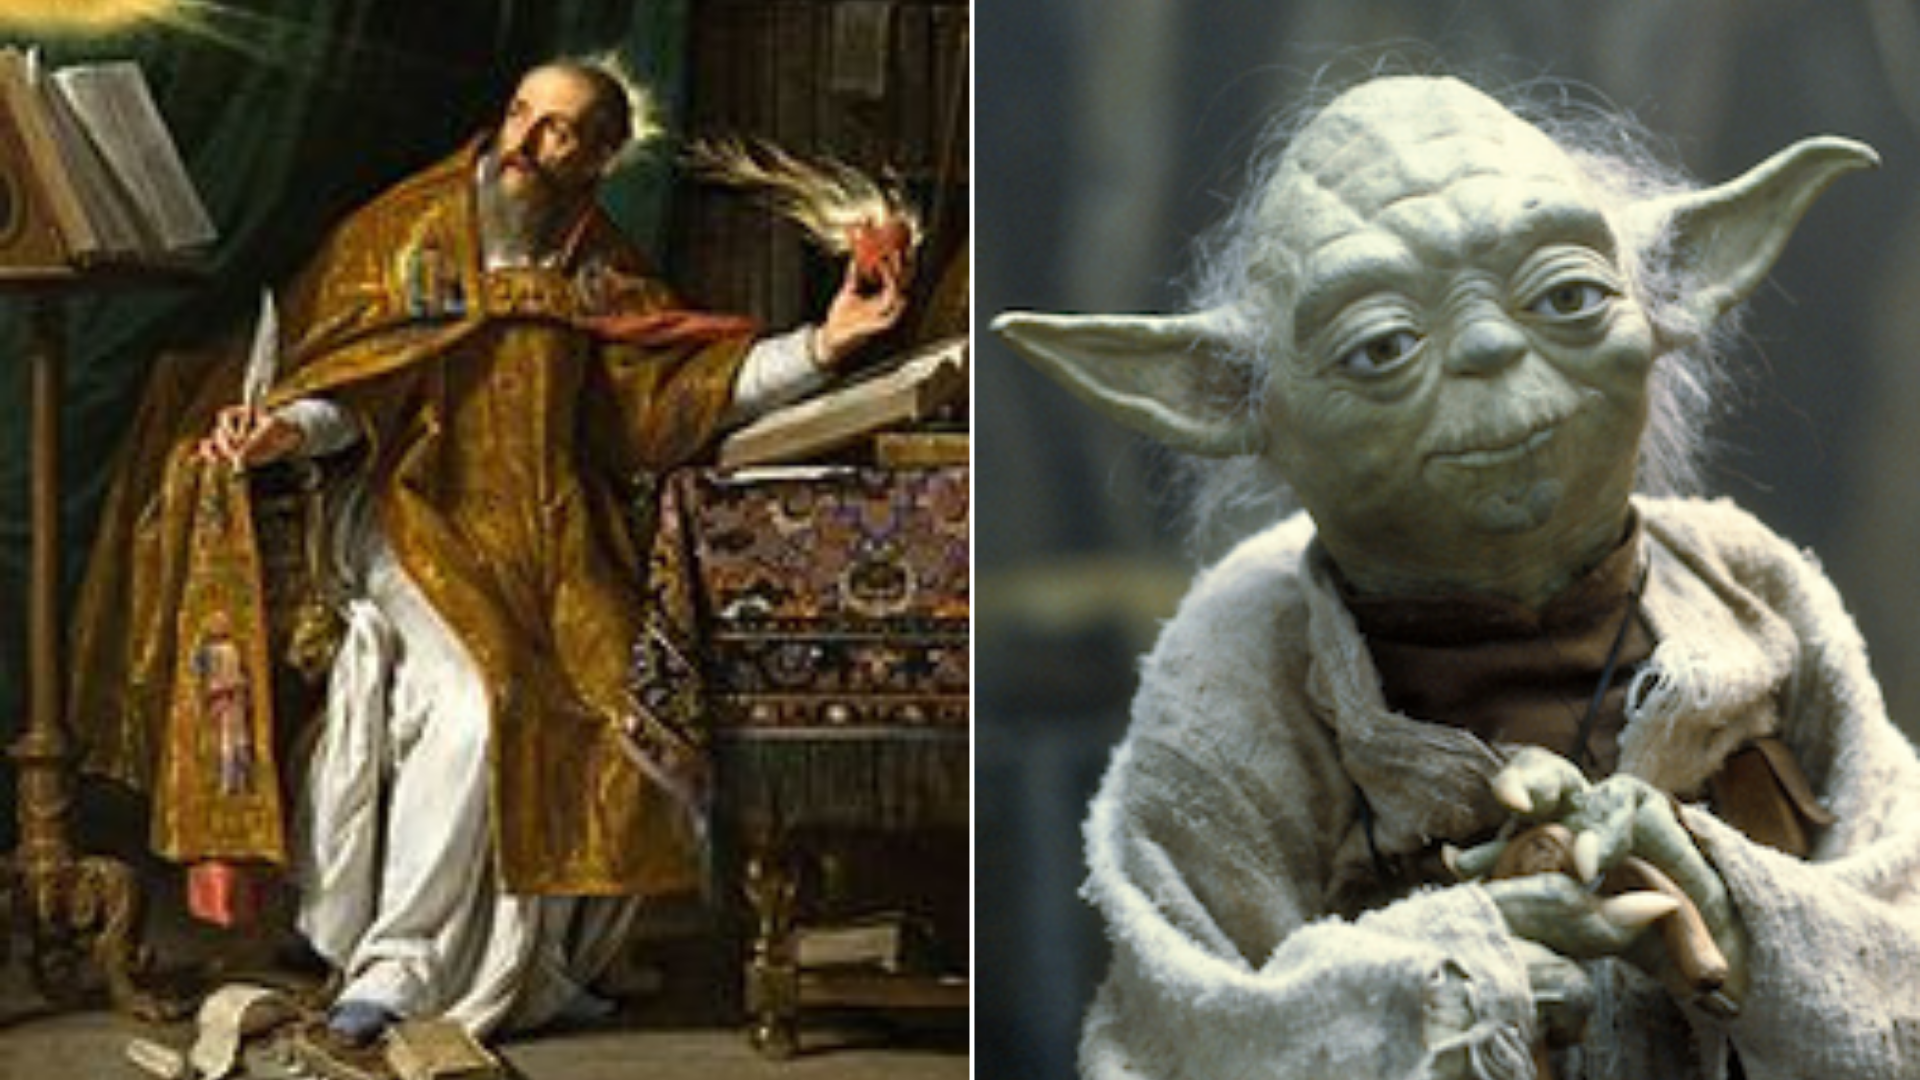 Yoda and Augustine - two wise figures who reflected on persons as "luminous beings."